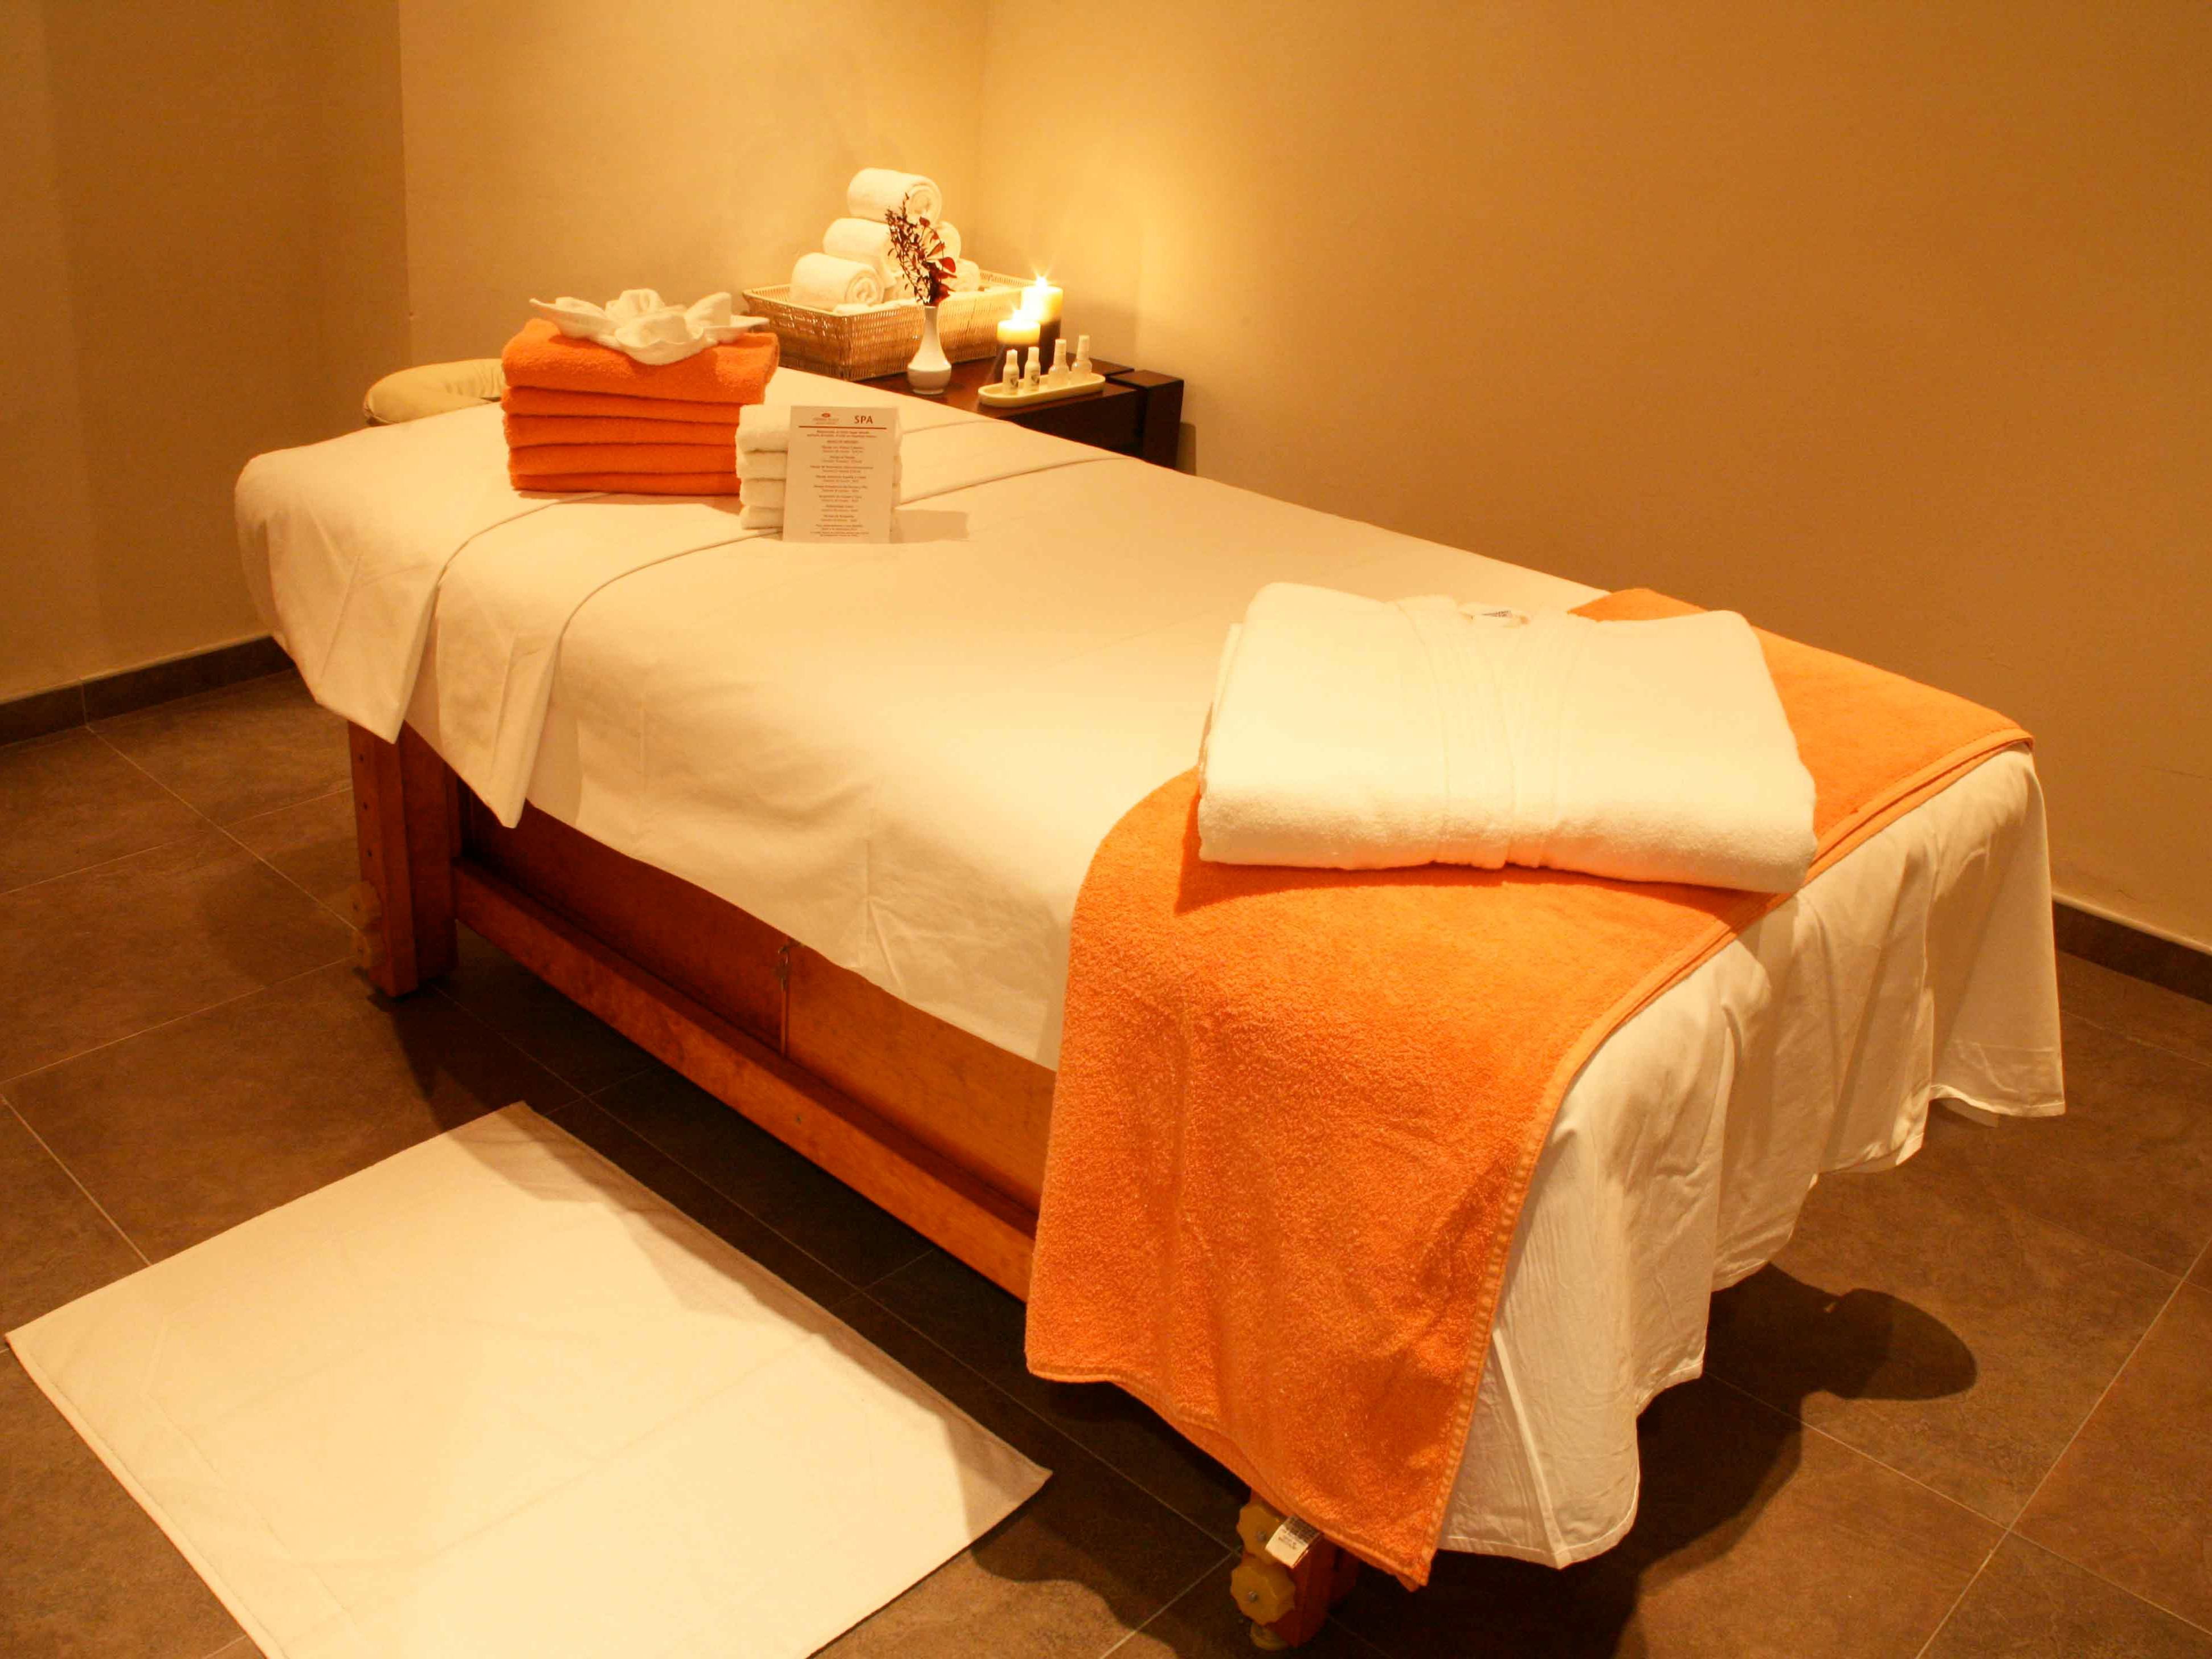 After a long week, you deserve your break. Enjoy a massage or body treatment.
Previous reservation.